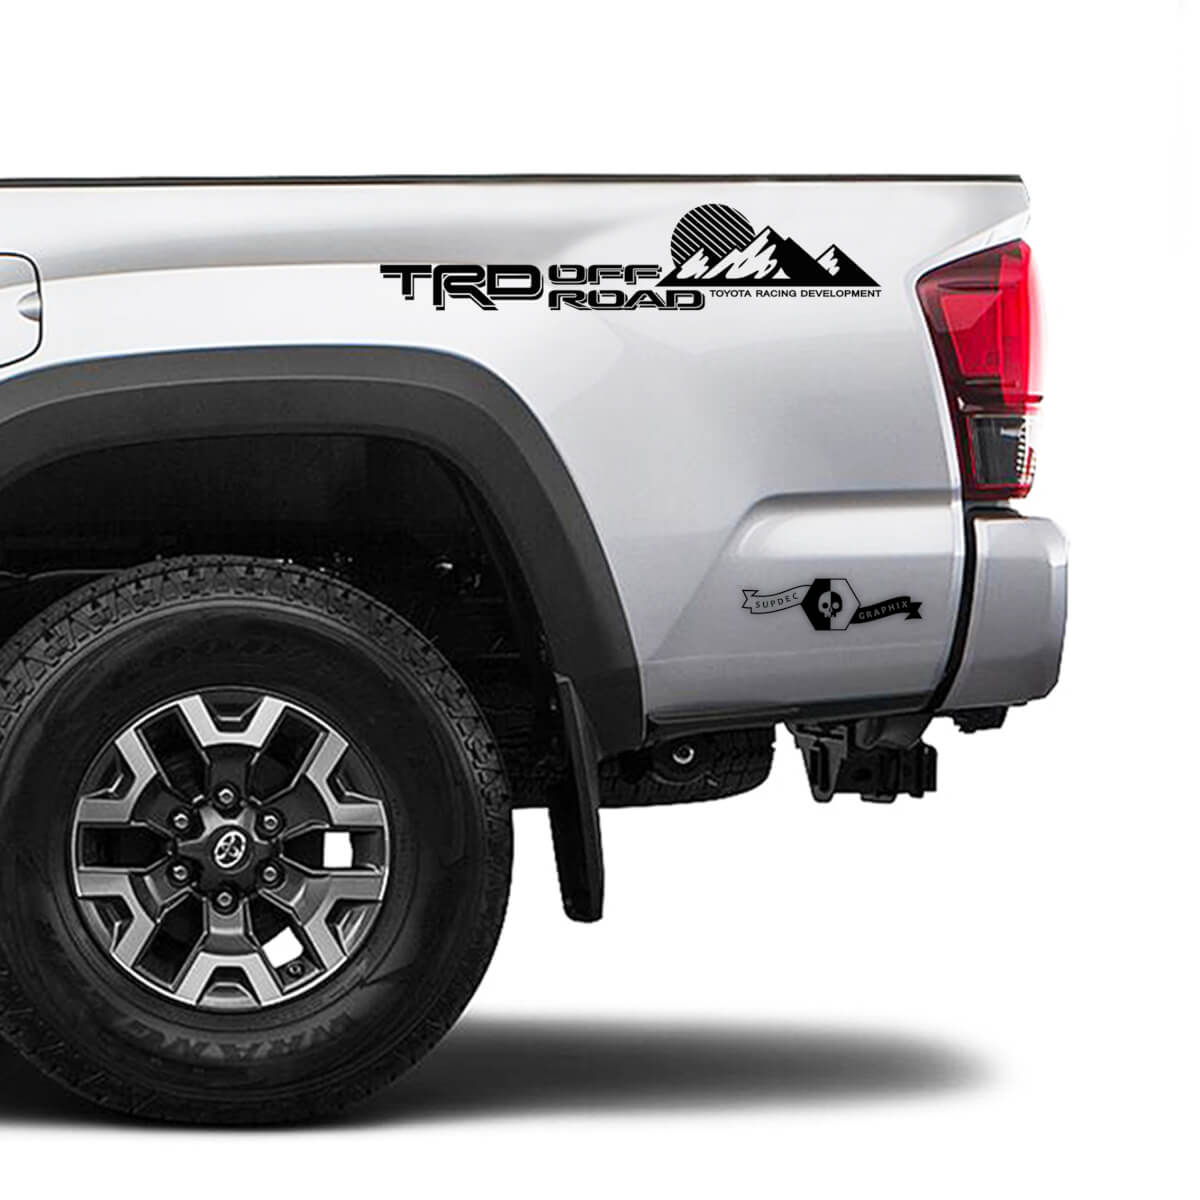 TRD 4x4 Off Road TOYOTA Sun Moon Mountains Decals Stickers for Tacoma Tundra 4Runner Hilux side